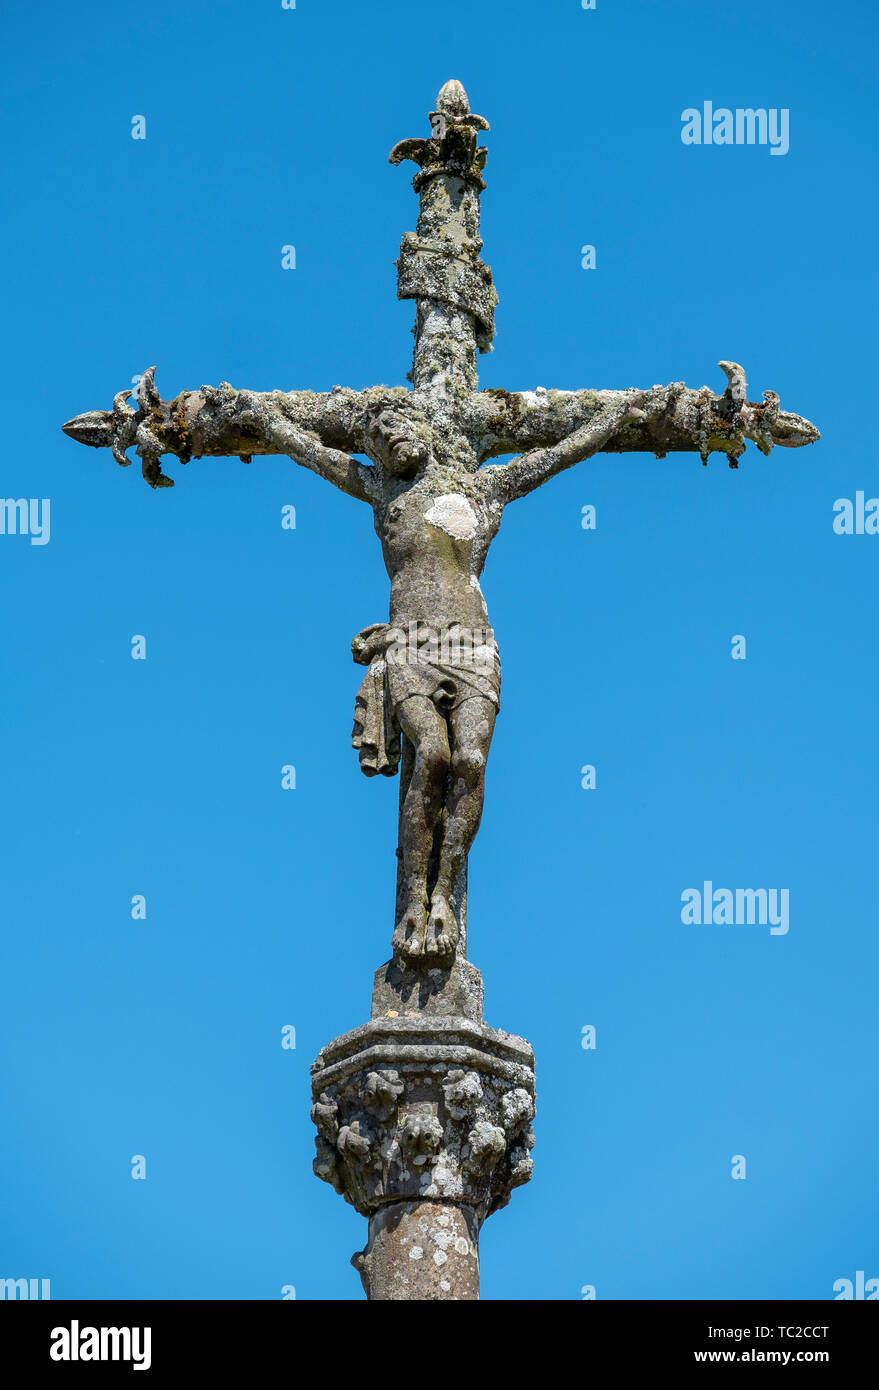 Stone statue of Christ on the cross against a blue sky at a cemetery in La Feuillée, Brittany, France. Stock Photo